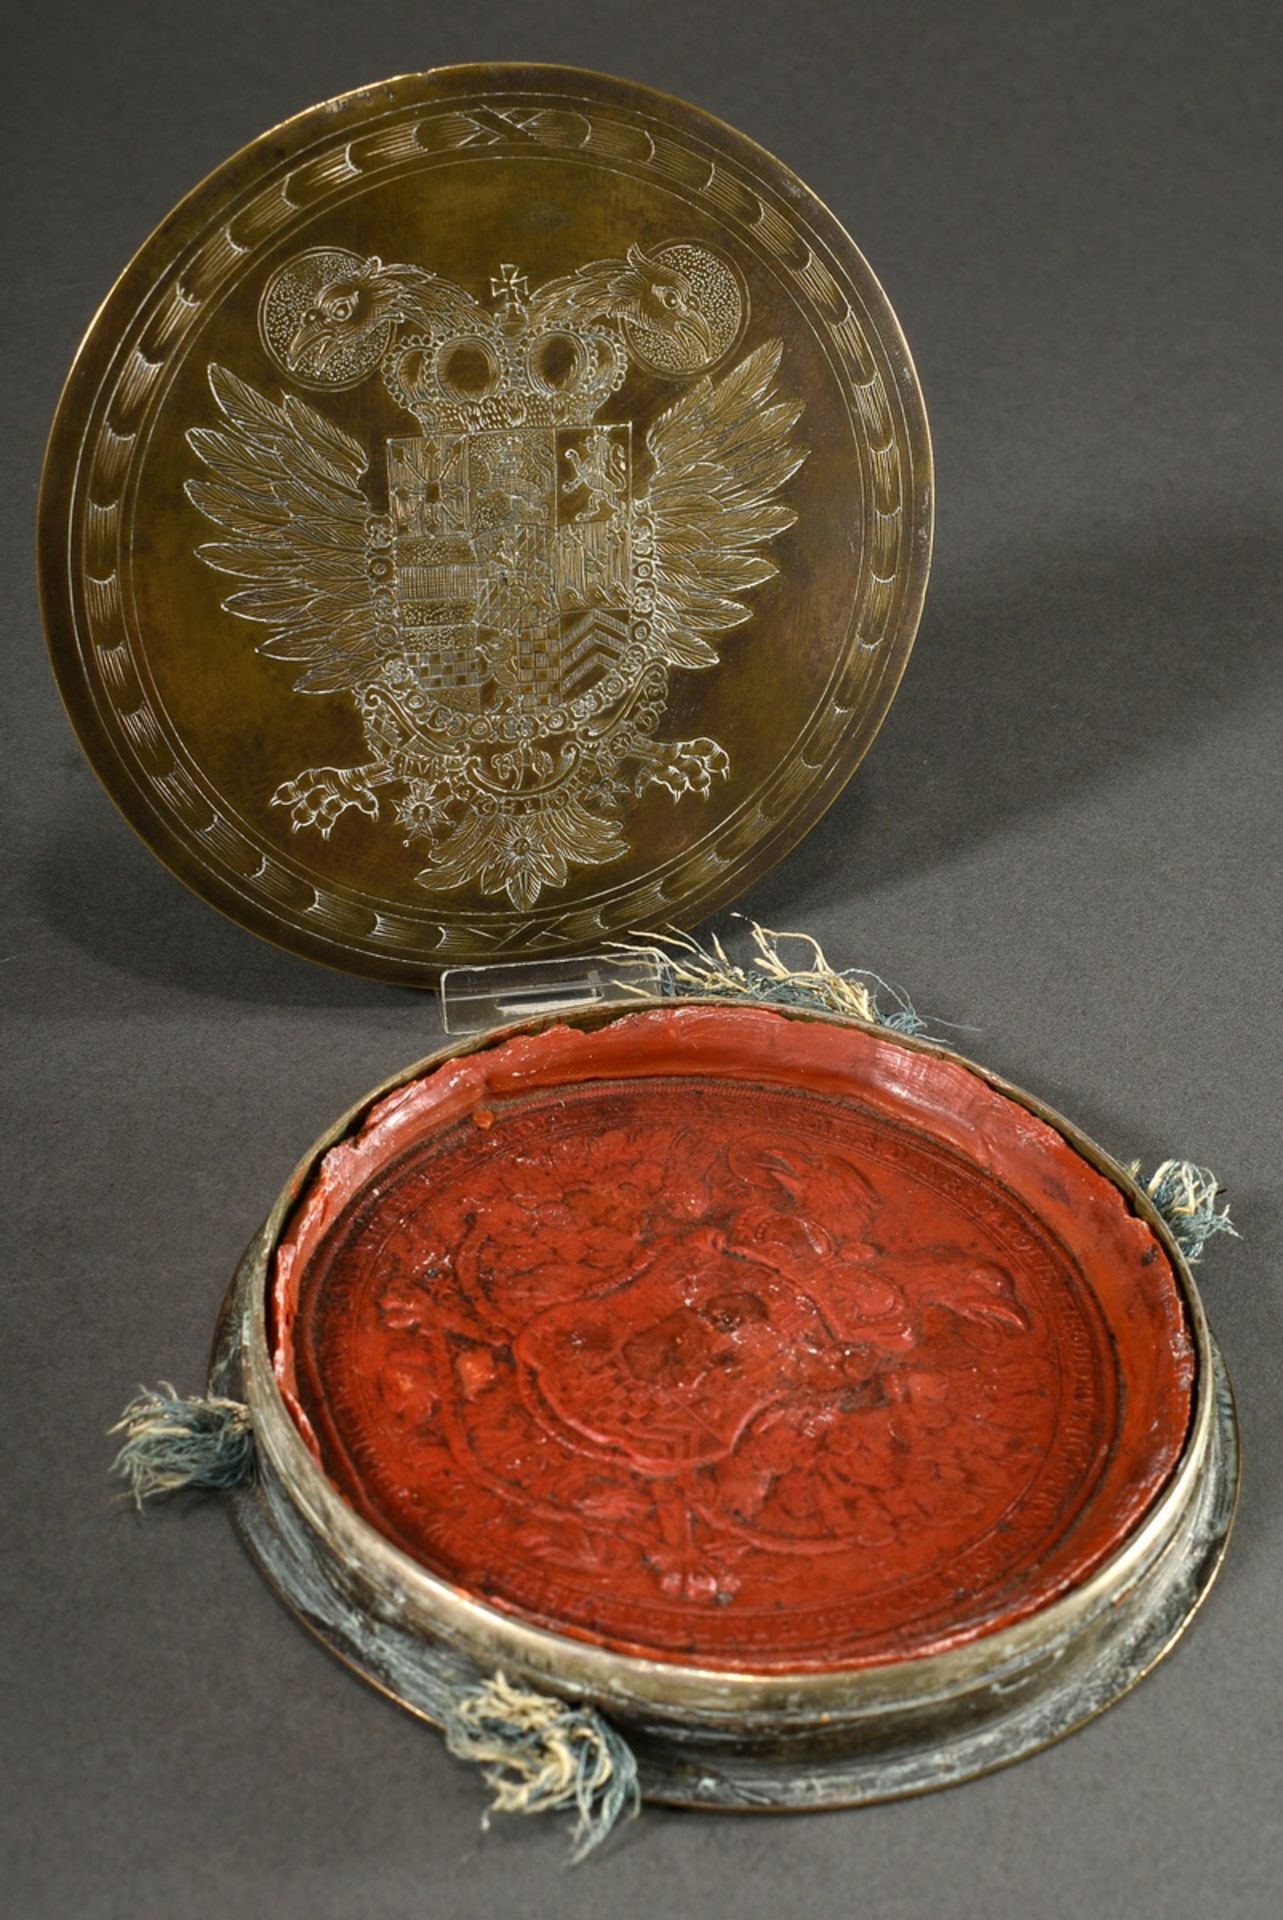 Carl Theodor von der Pfalz (1724-1799) Wax seal in two-part capsule of gilded non-ferrous metal, on